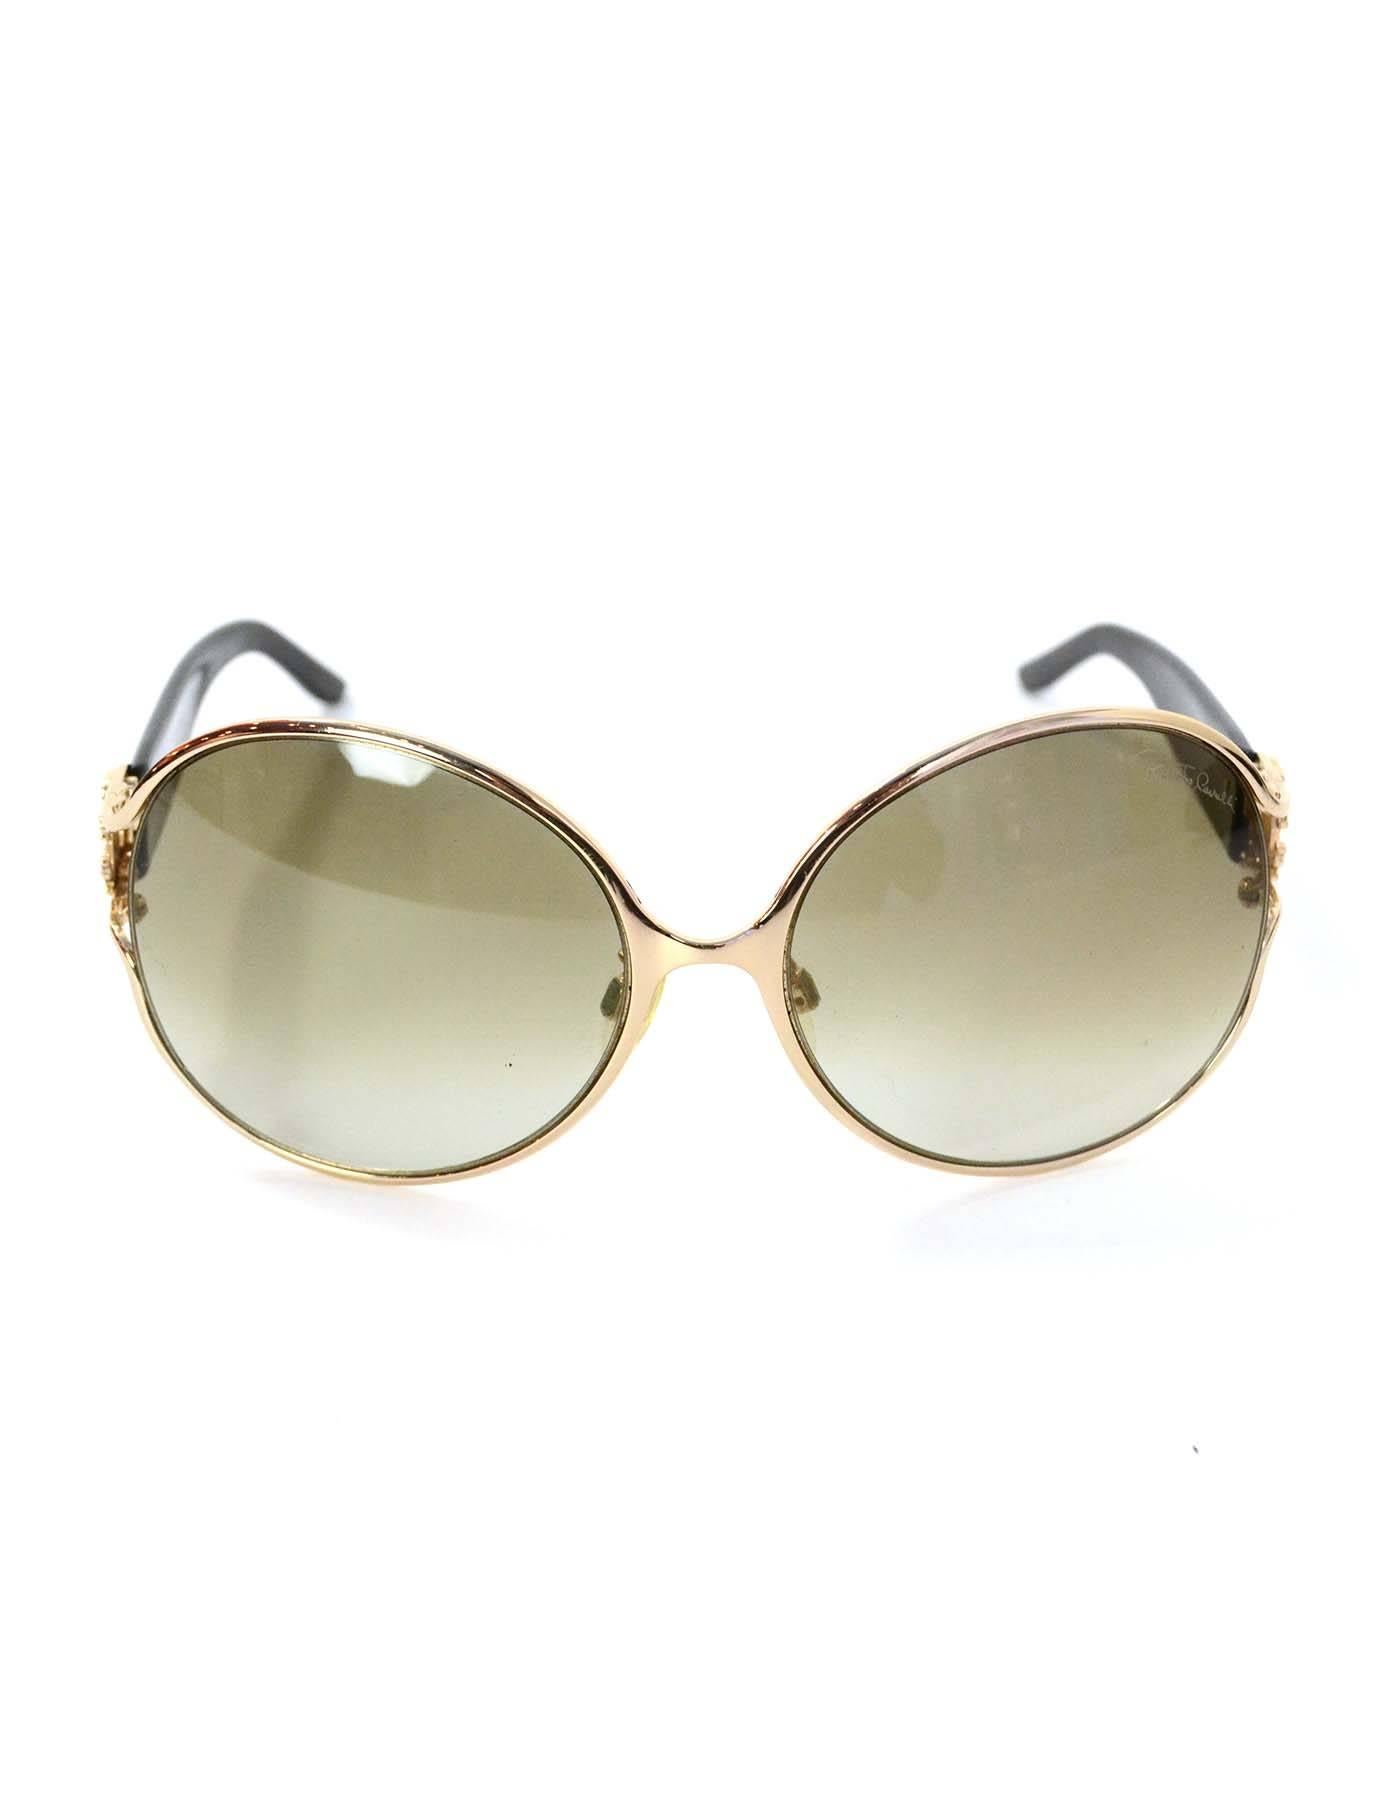 Roberto Cavalli Round Frame Sunglasses with Crystals

Features crystal logo at arms

Made In: Italy
Color: Black and gold
Materials: Metal and resin
Overall Condition: Excellent pre-owned condition
Includes: Roberto Cavalli